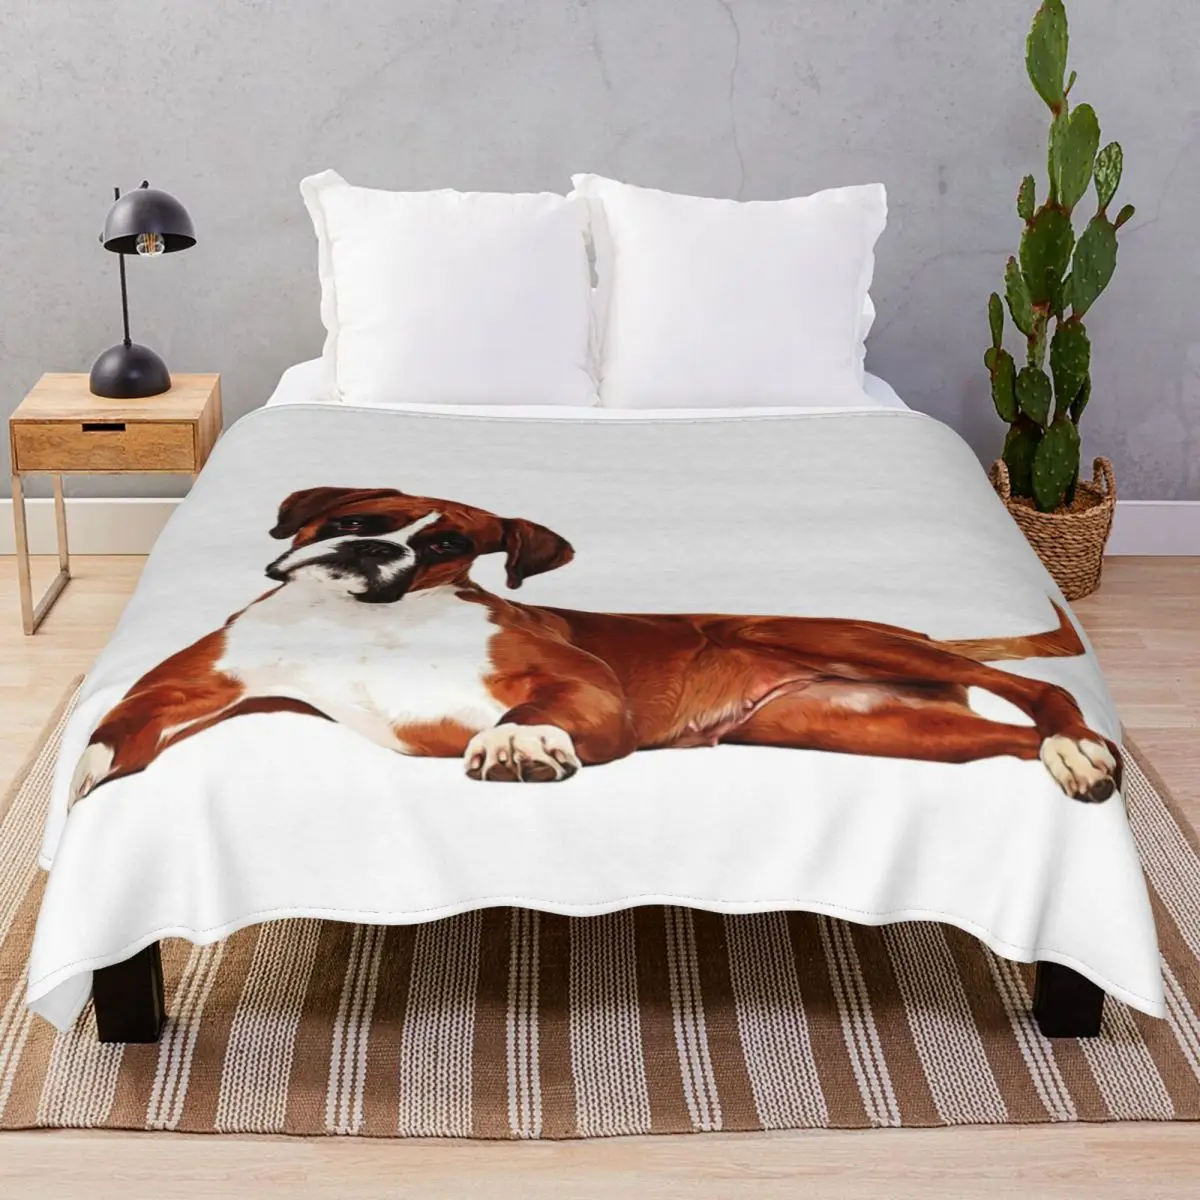 Adorable Boxer Dog Blanket Fleece Plush Decoration Warm Throw Blankets for Bed Home Couch Travel Cinema